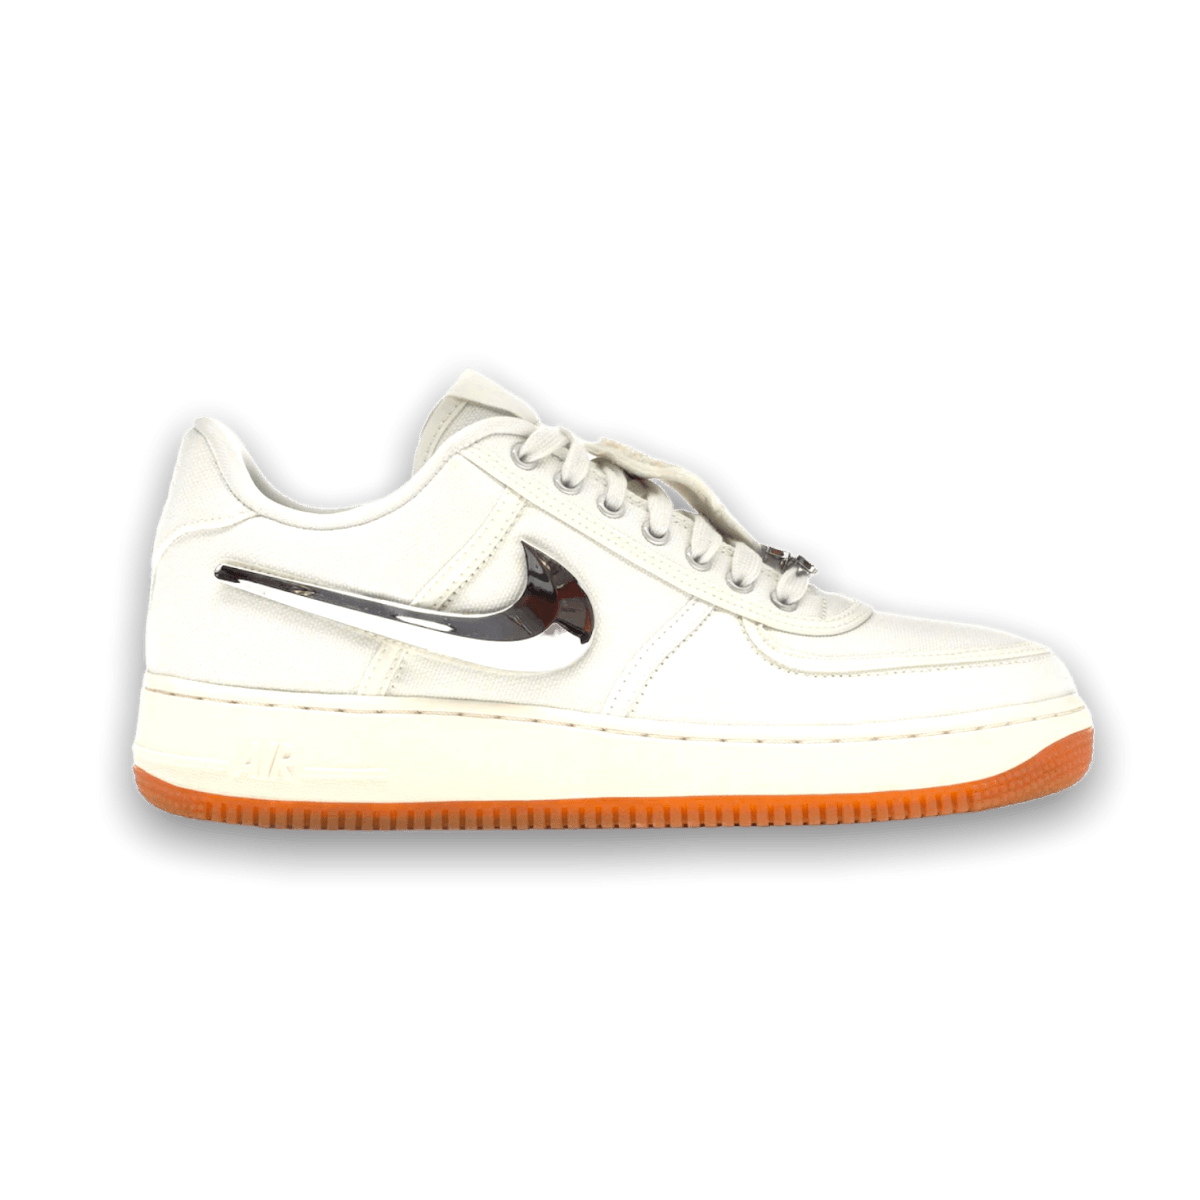 Air Force 1 Low Travis Scott Sail - Gently Enjoyed (Used) Men 11 - Low Sneaker - Nike - Jawns on Fire